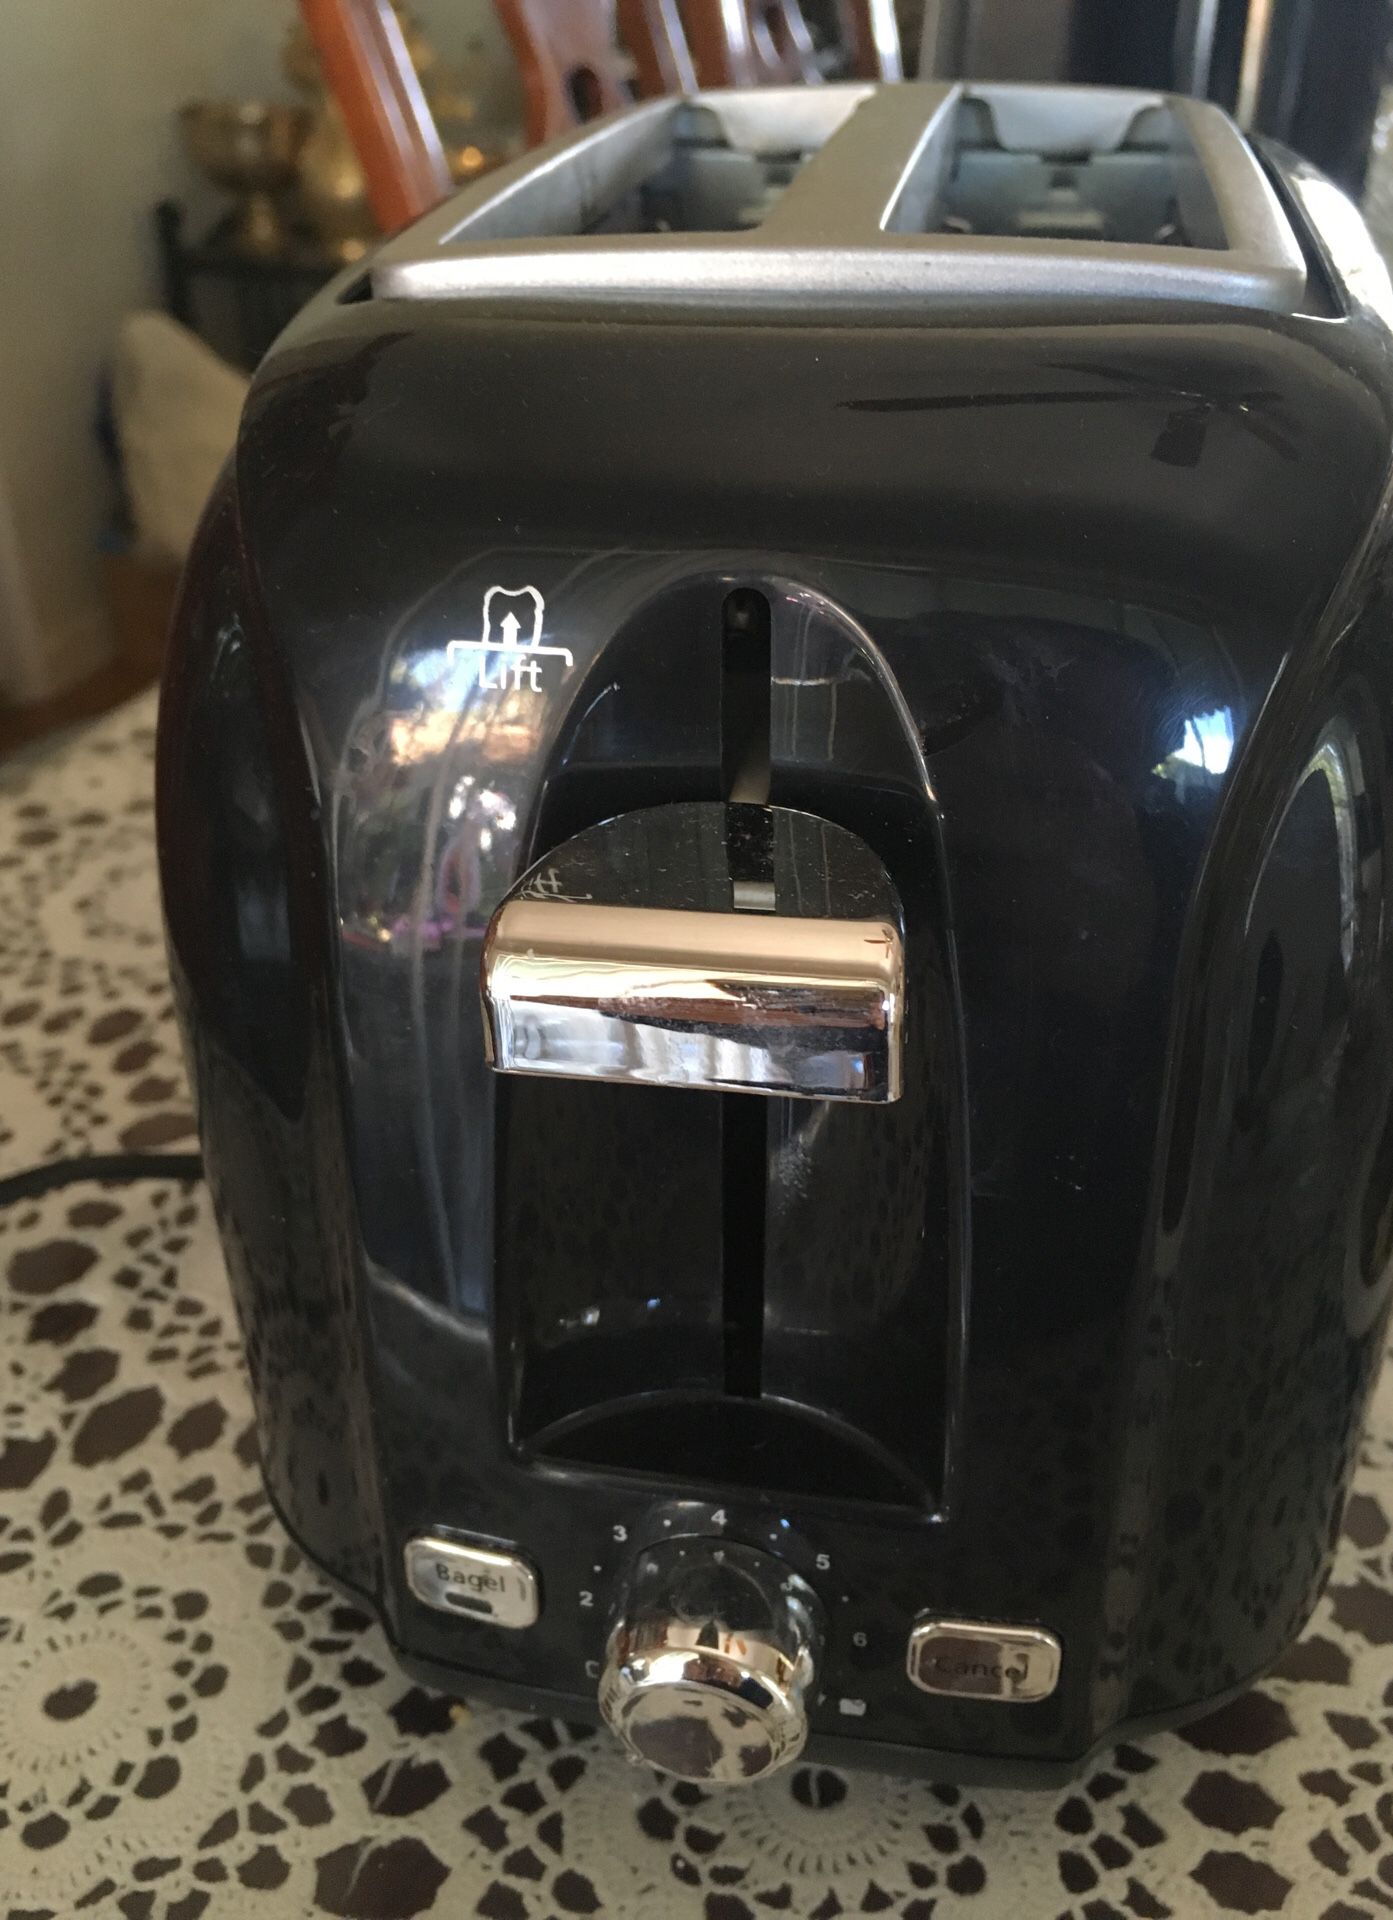 Sunbeam 2 bread toaster great working condition